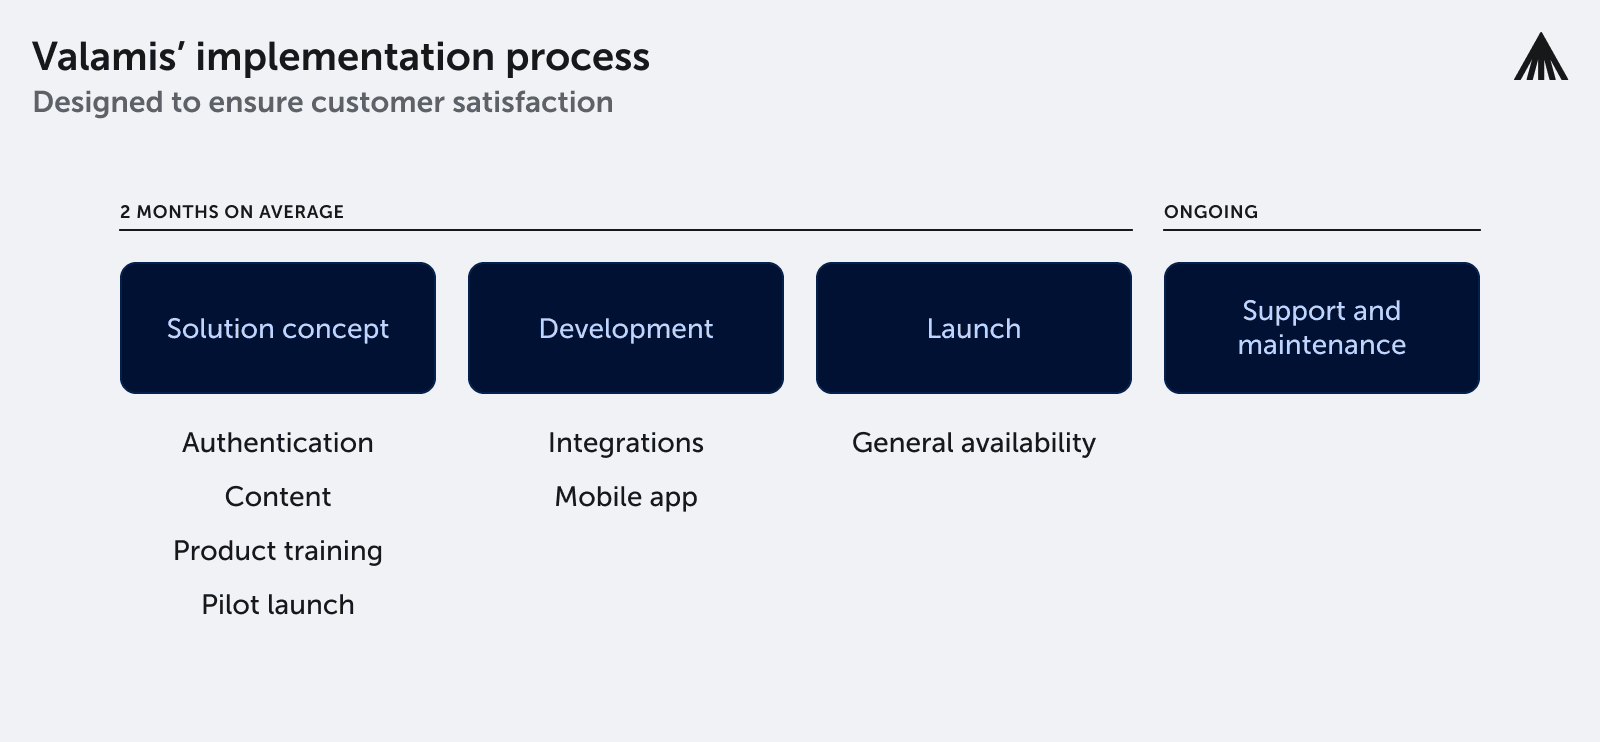 The list of steps of Valamis' implementation process